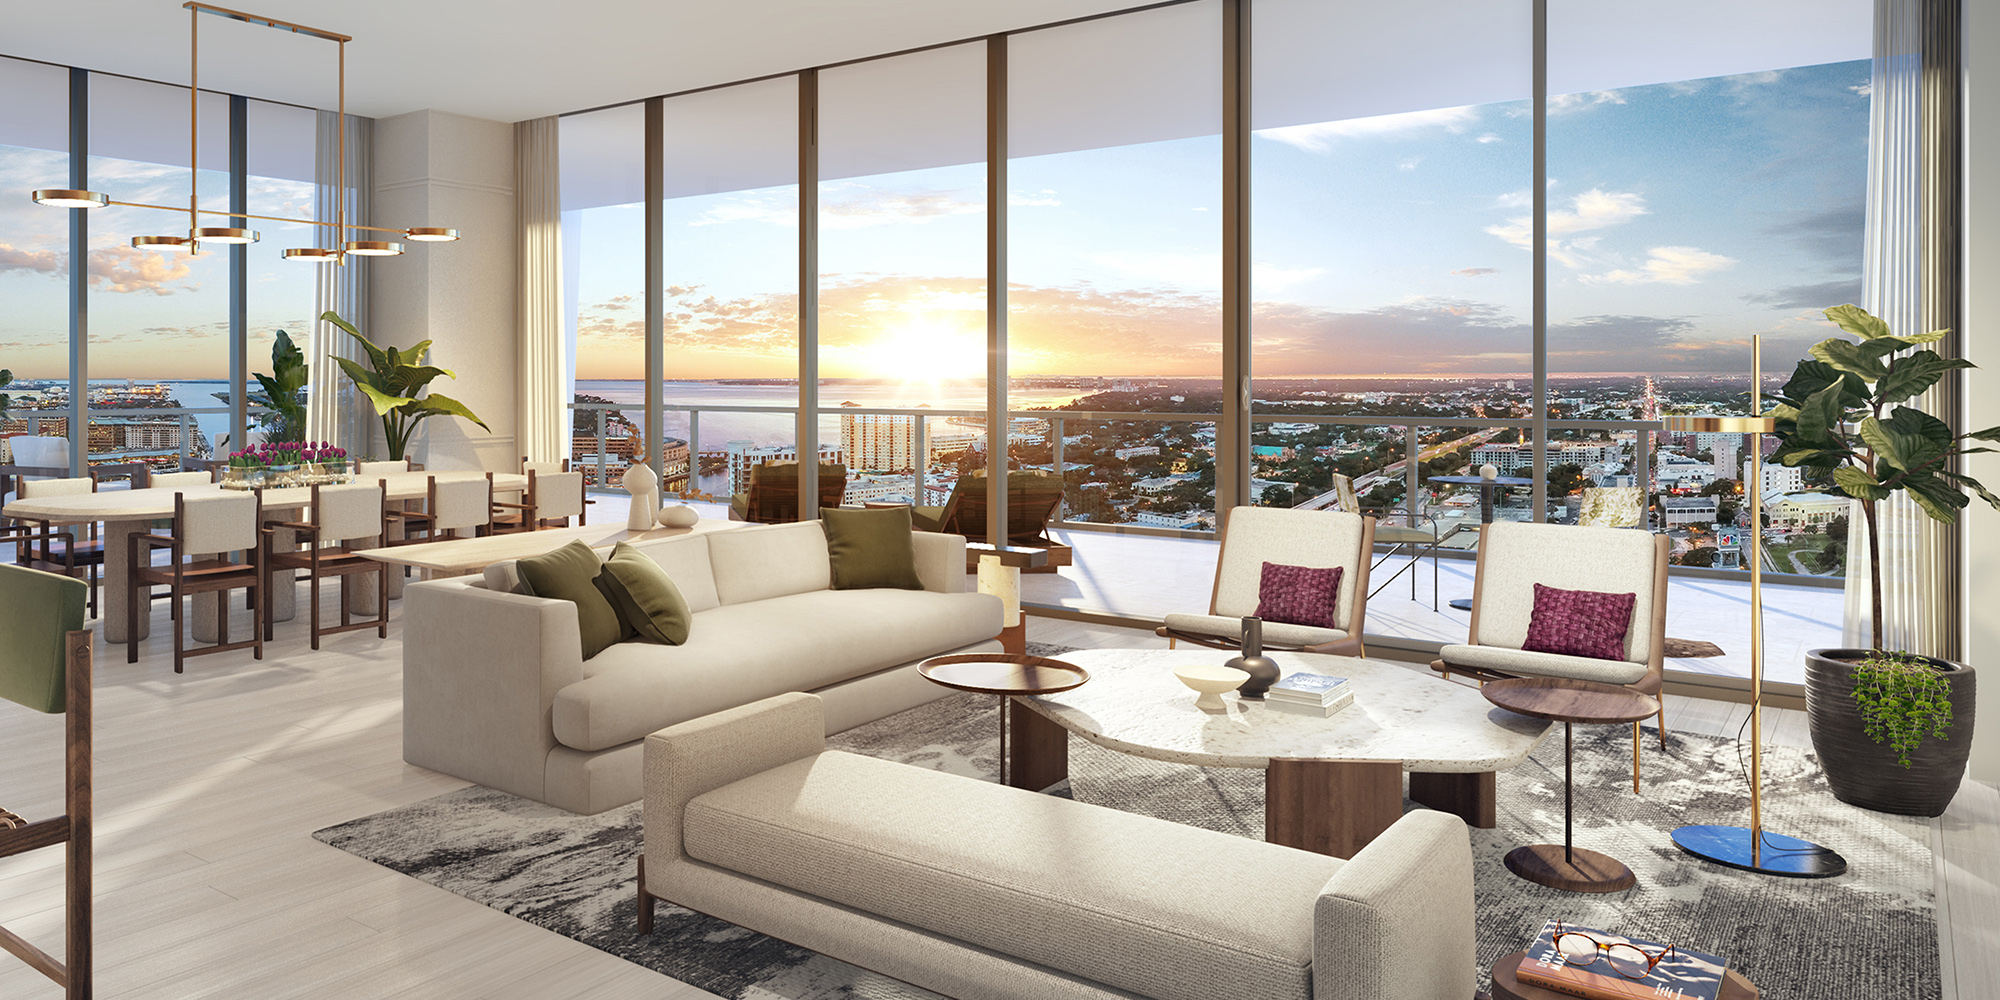 This rendering gives a look inside a Pendry Tampa condo, including an open concept living and dining area and floor-to-ceiling glass walls to maximize the view along the Tampa Riverwalk.